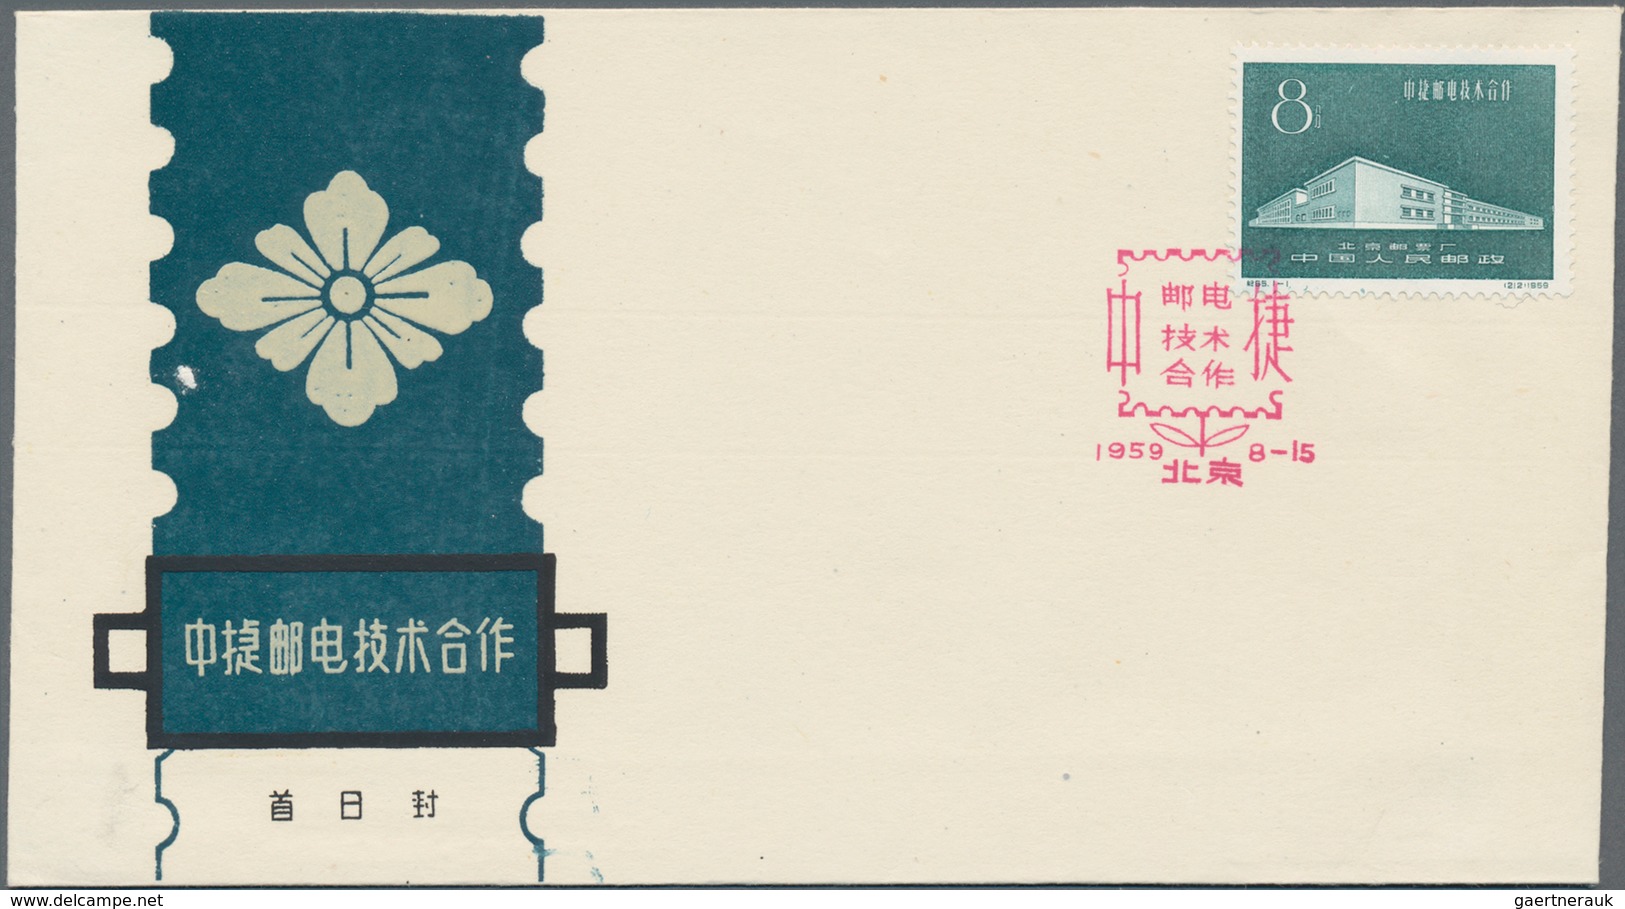 China - Volksrepublik: 1959, 7 First Day Covers Of C62, C63, C65, C66, S33, S35, Bearing The 6 Full - Covers & Documents